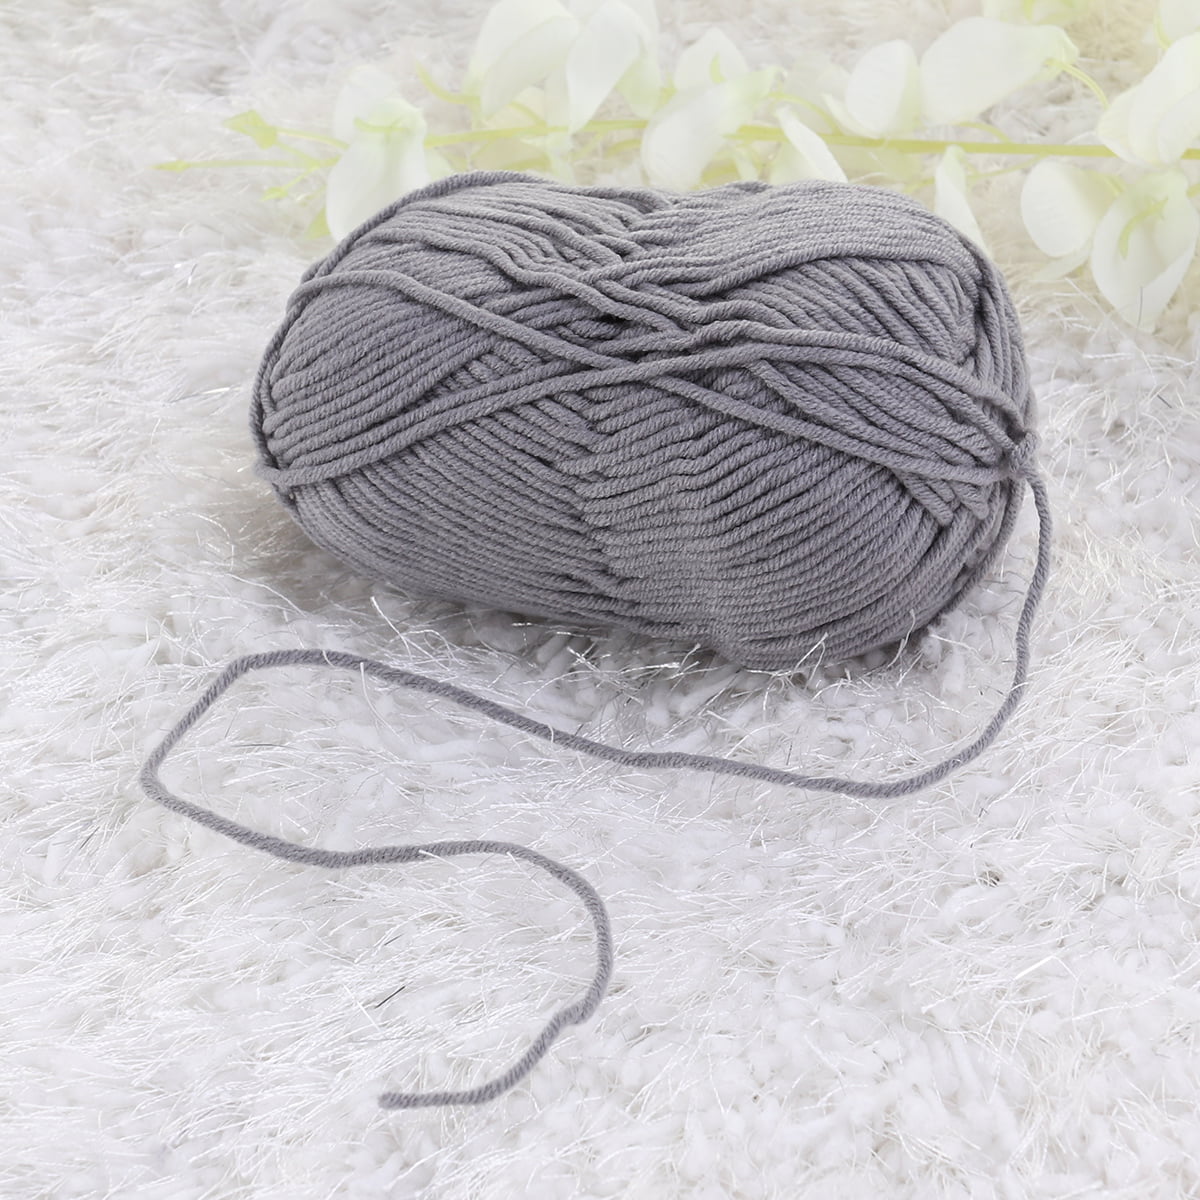 Natural Milk Thick Fingering Weight Cotton Yarn 50g For Knitting, Baby  Cotton Crochet, And Woven Thread Available P230601 From Mengqiqi05, $5.83